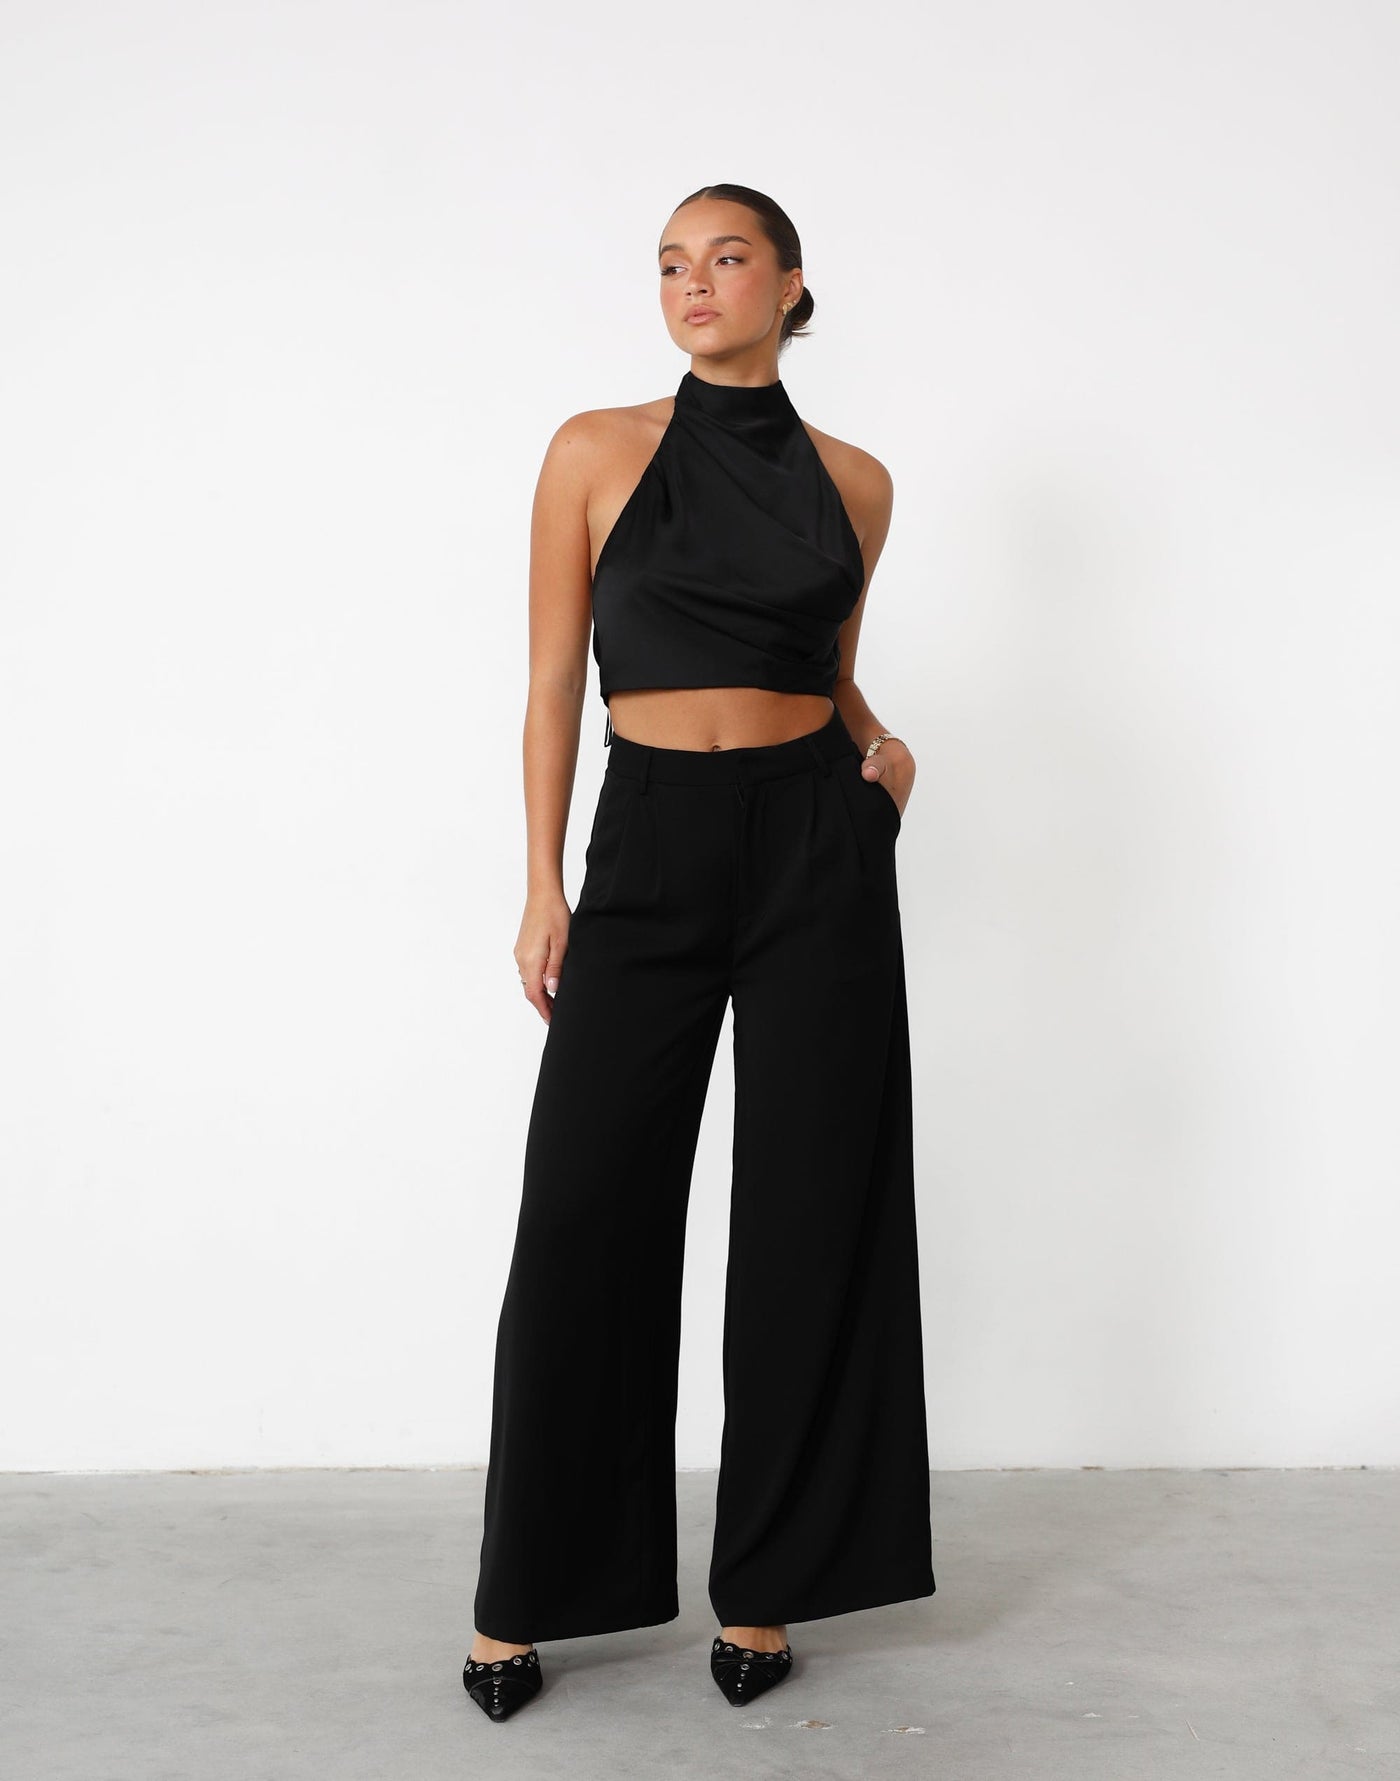 Chicago Pants (Black) - High Rise Tailored Wide Leg Pants - Women's Pants - Charcoal Clothing